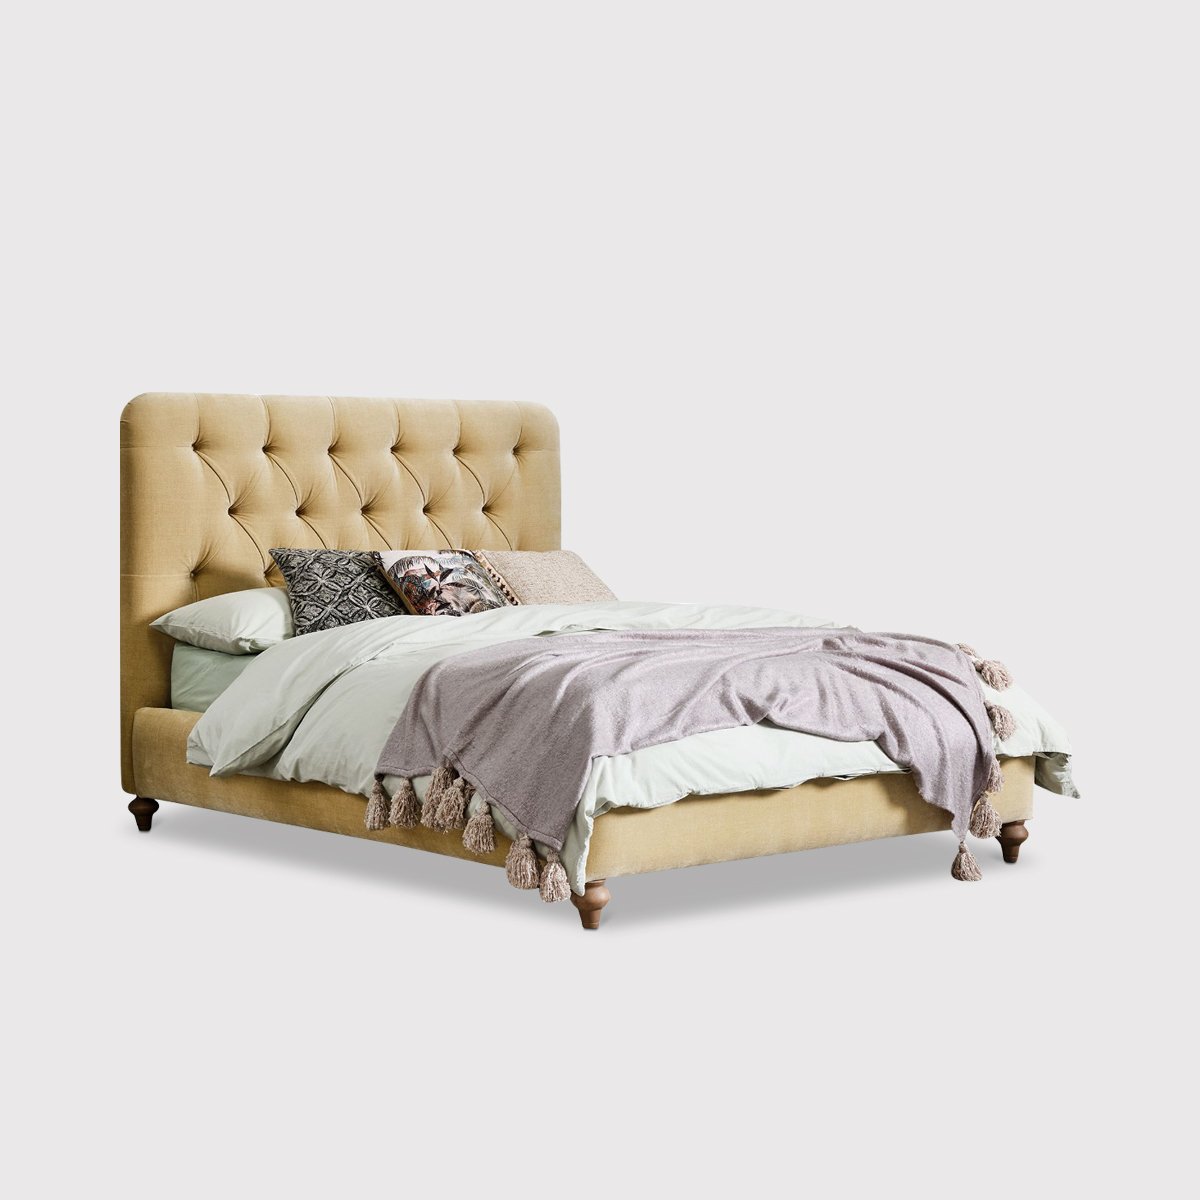 Delphine Super King Bed Frame, Yellow | Barker & Stonehouse